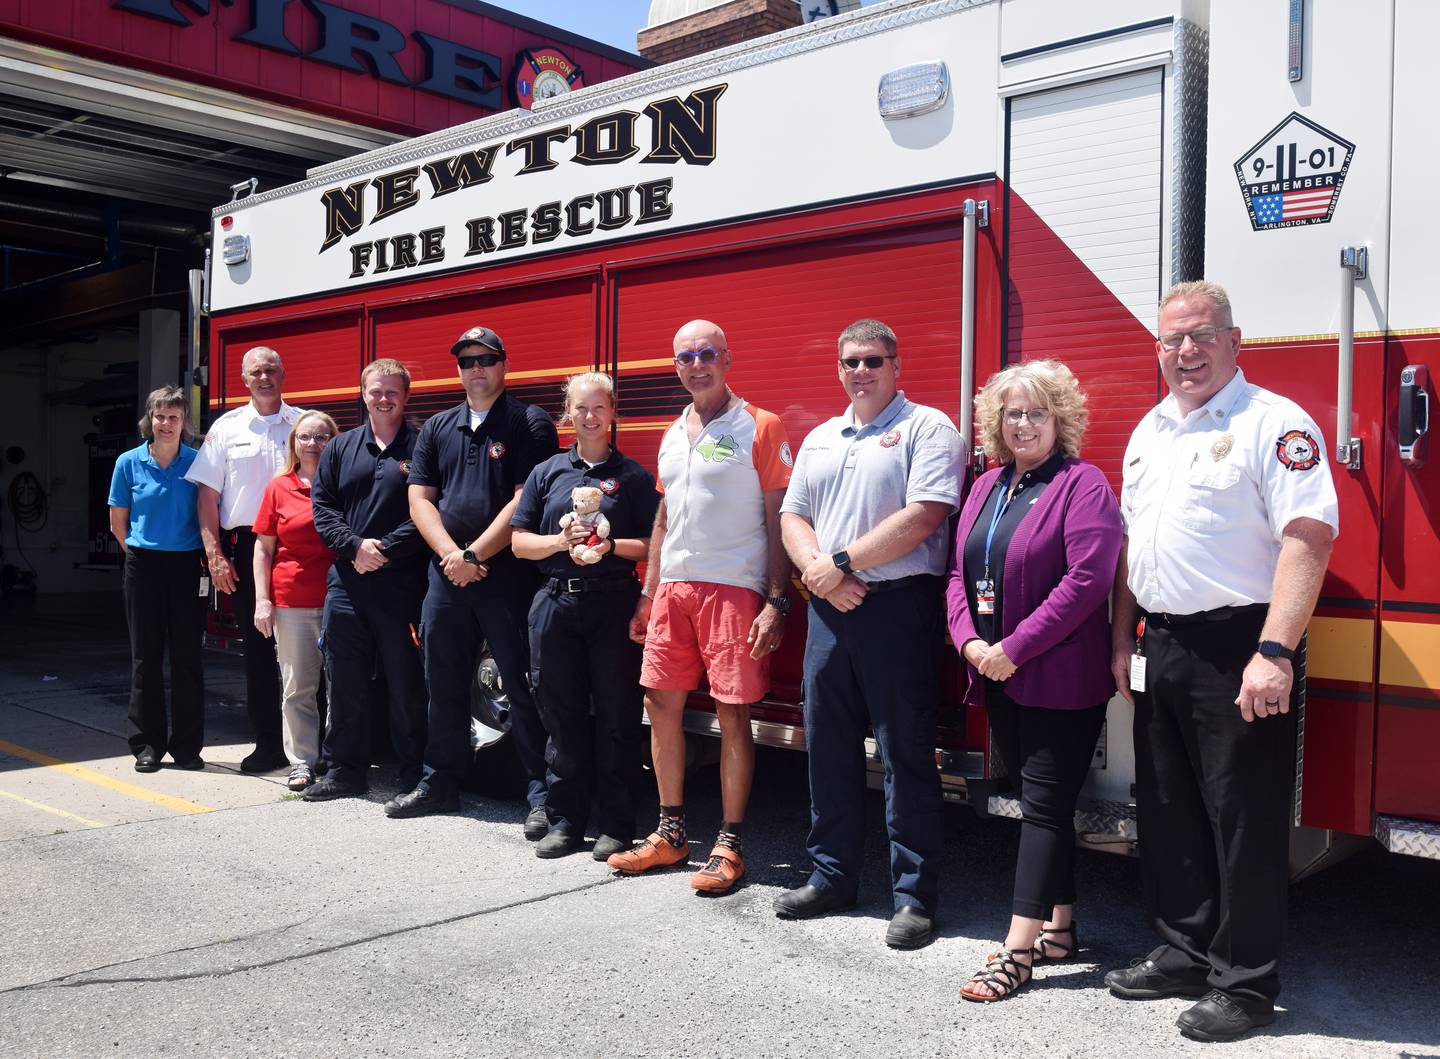 Jörg Richter, a German cyclist and former firefighter, poses for pictures with administrators, firefighters, paramedics and office staff from the Newton Fire Department. Richter made an overnight stay at the Newton fire station. He is riding across the country to bring awareness to children with rare diseases.